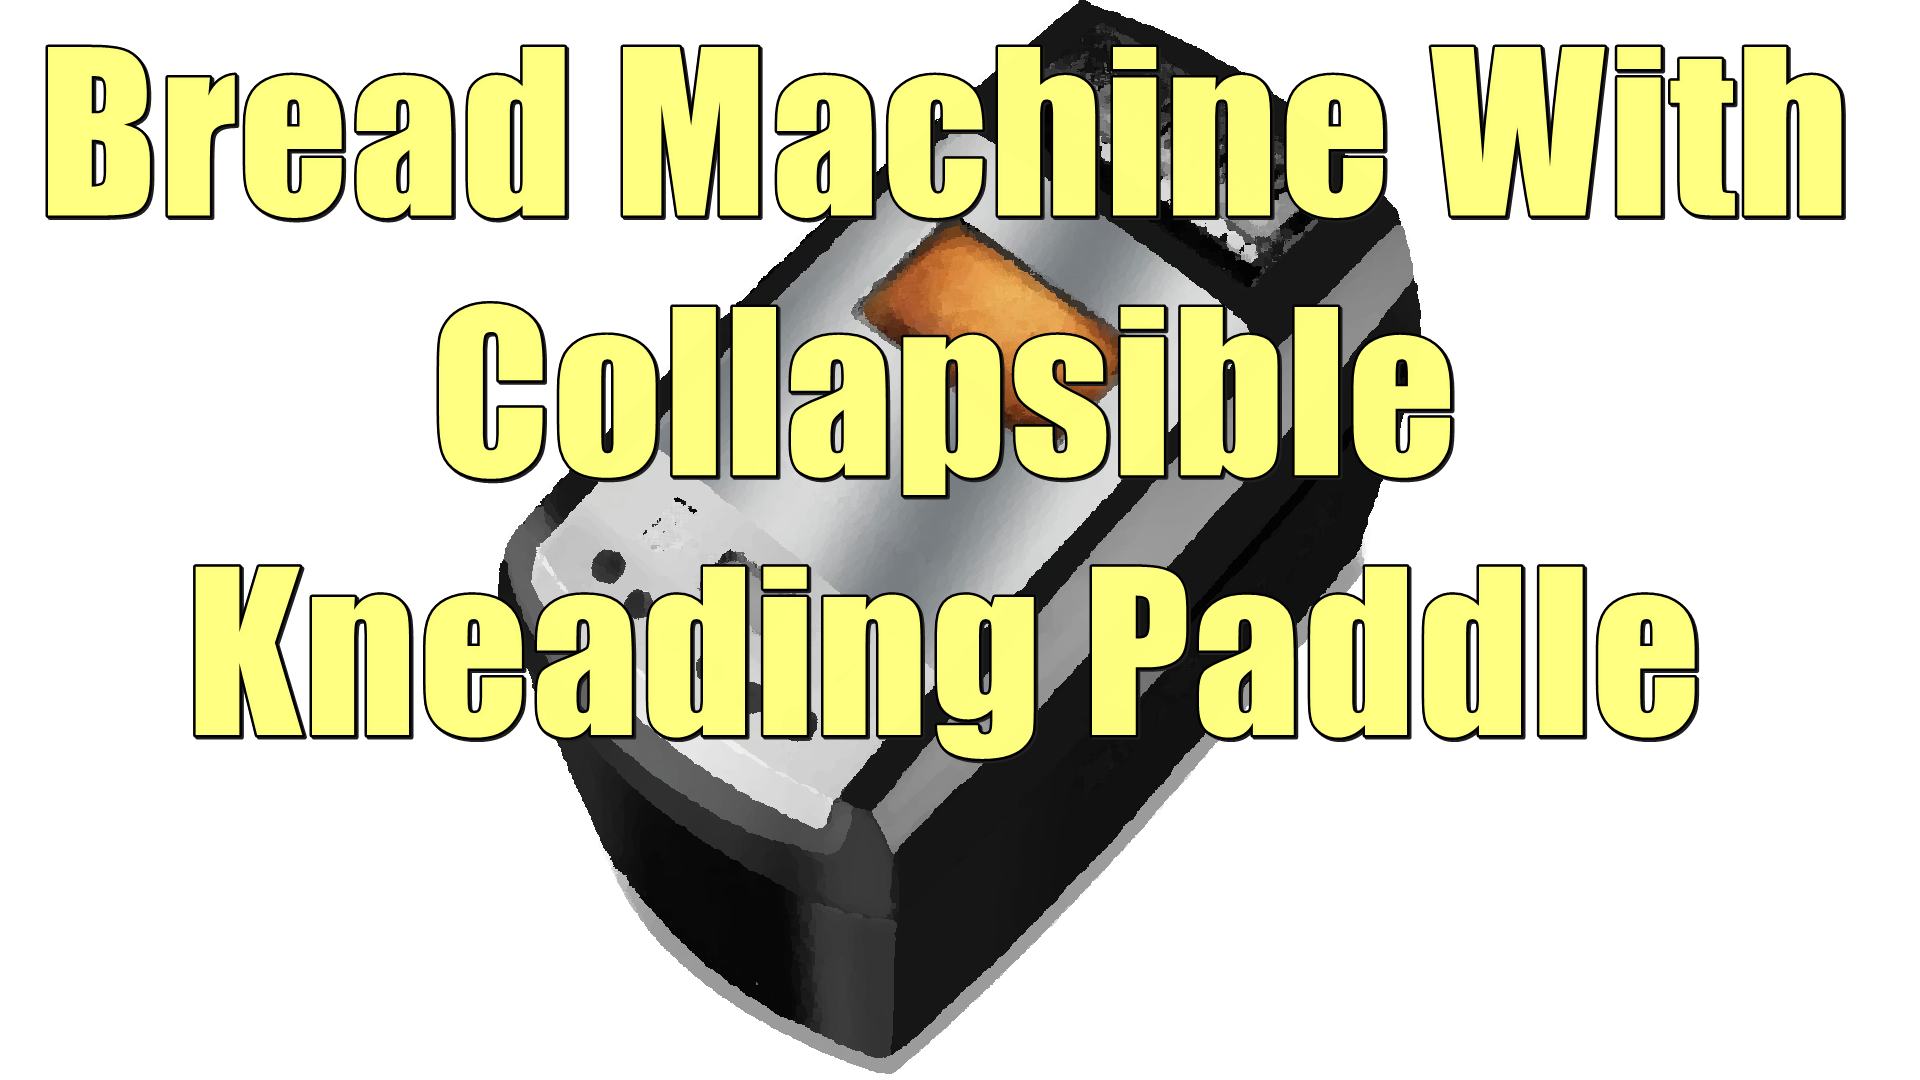 Bread machine with collapsible kneading paddle